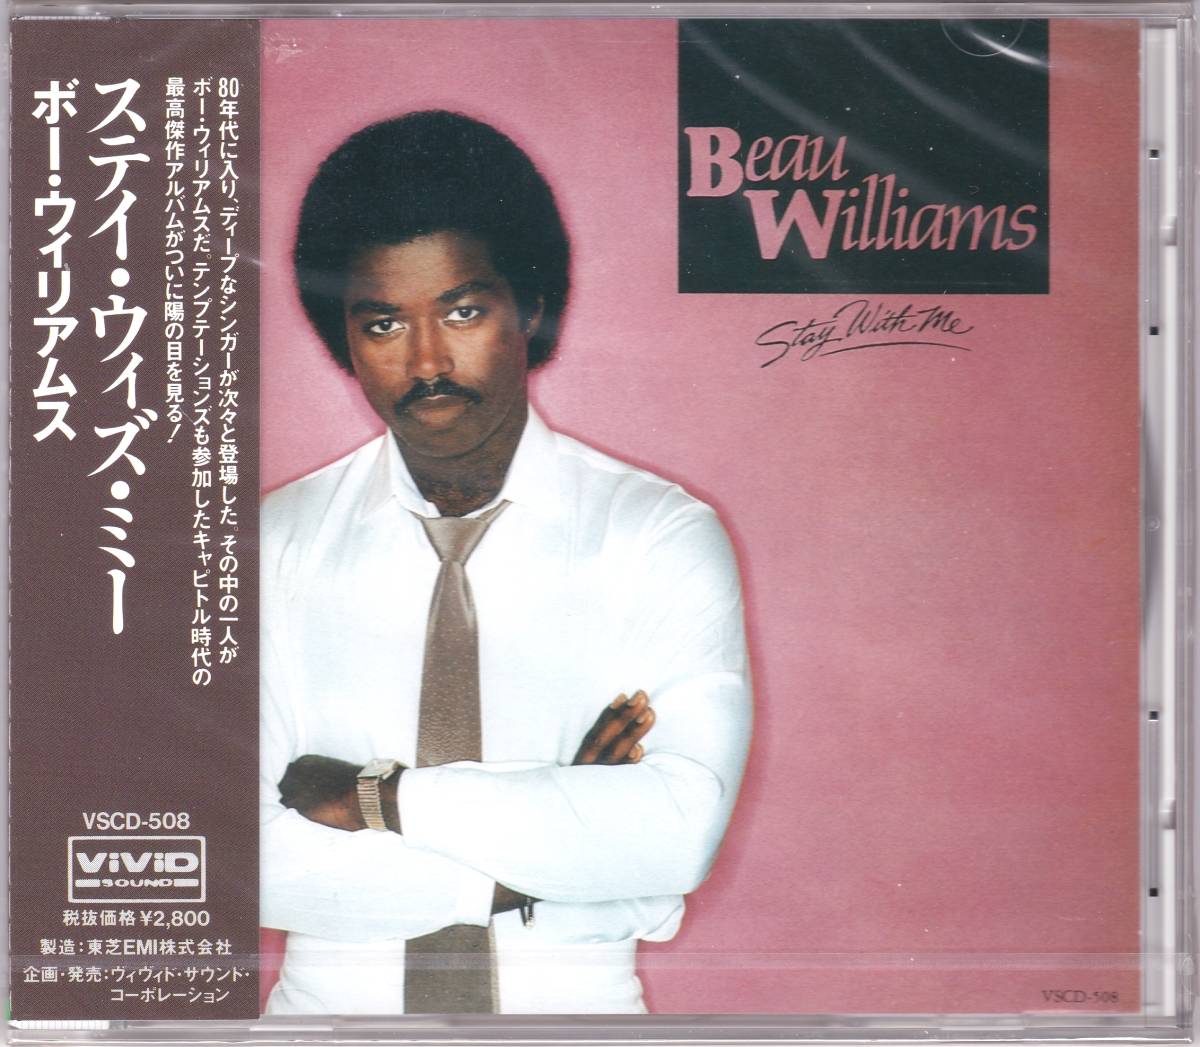 ☆BEAU WILLIAMS(ボー・ウィリアムス)/Stay With Me◆83年発表のブラコン超大名盤◇世界初CD化＆激レア＆奇跡の『未開封新品の国内盤』★_画像1